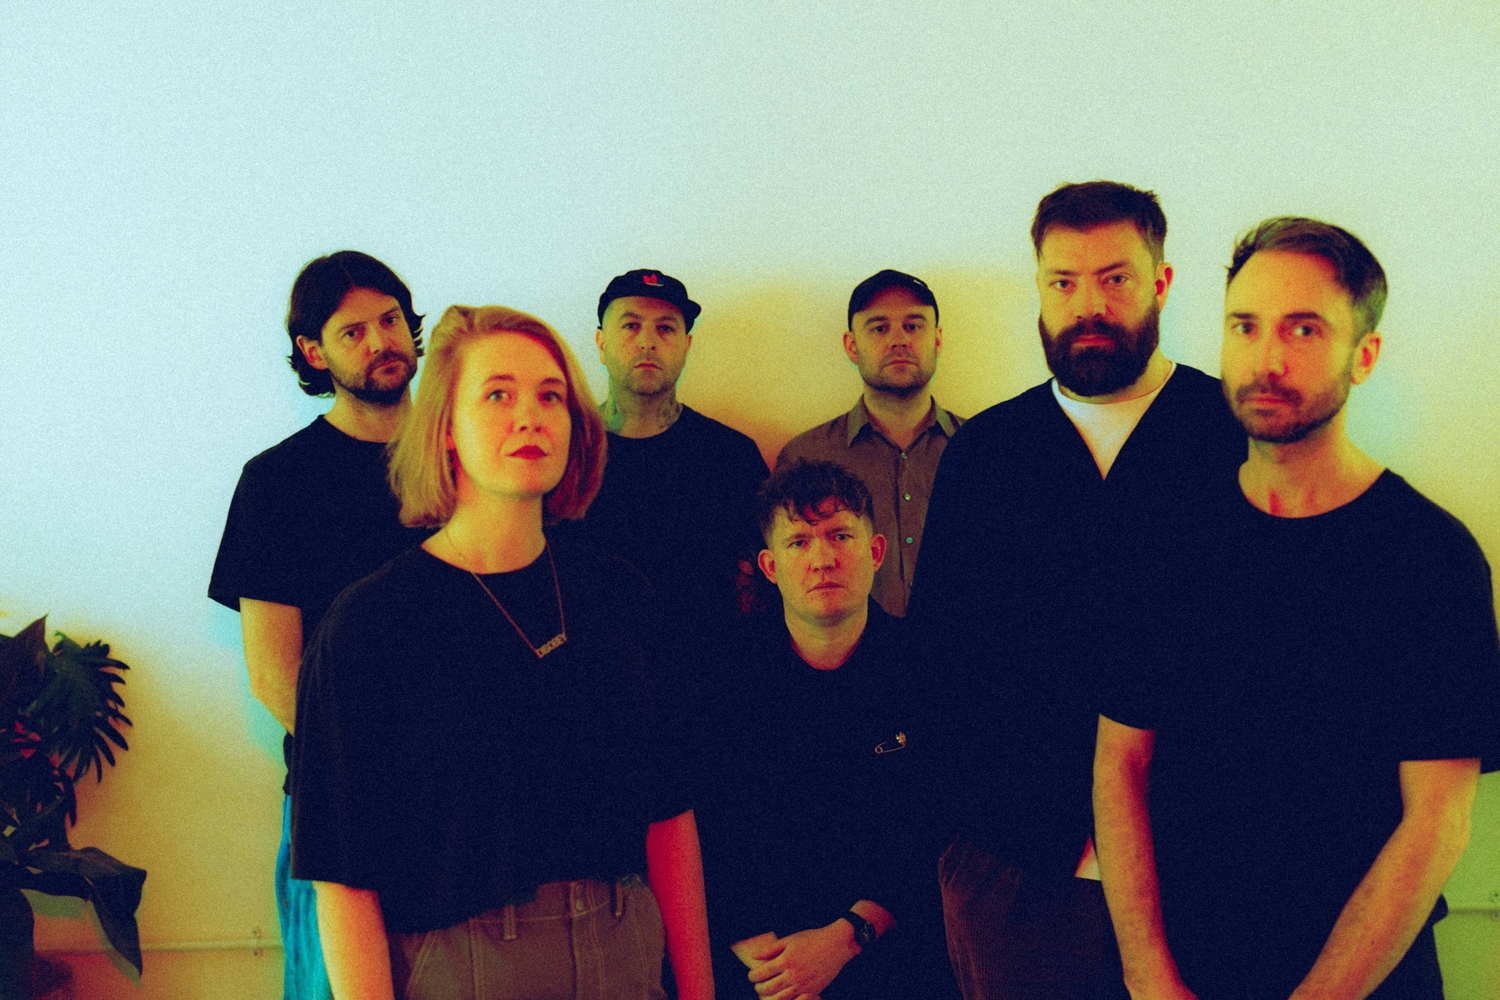 Los Campesinos! follow news of seventh album ‘All Hell’ with second single ‘A Psychic Wound’